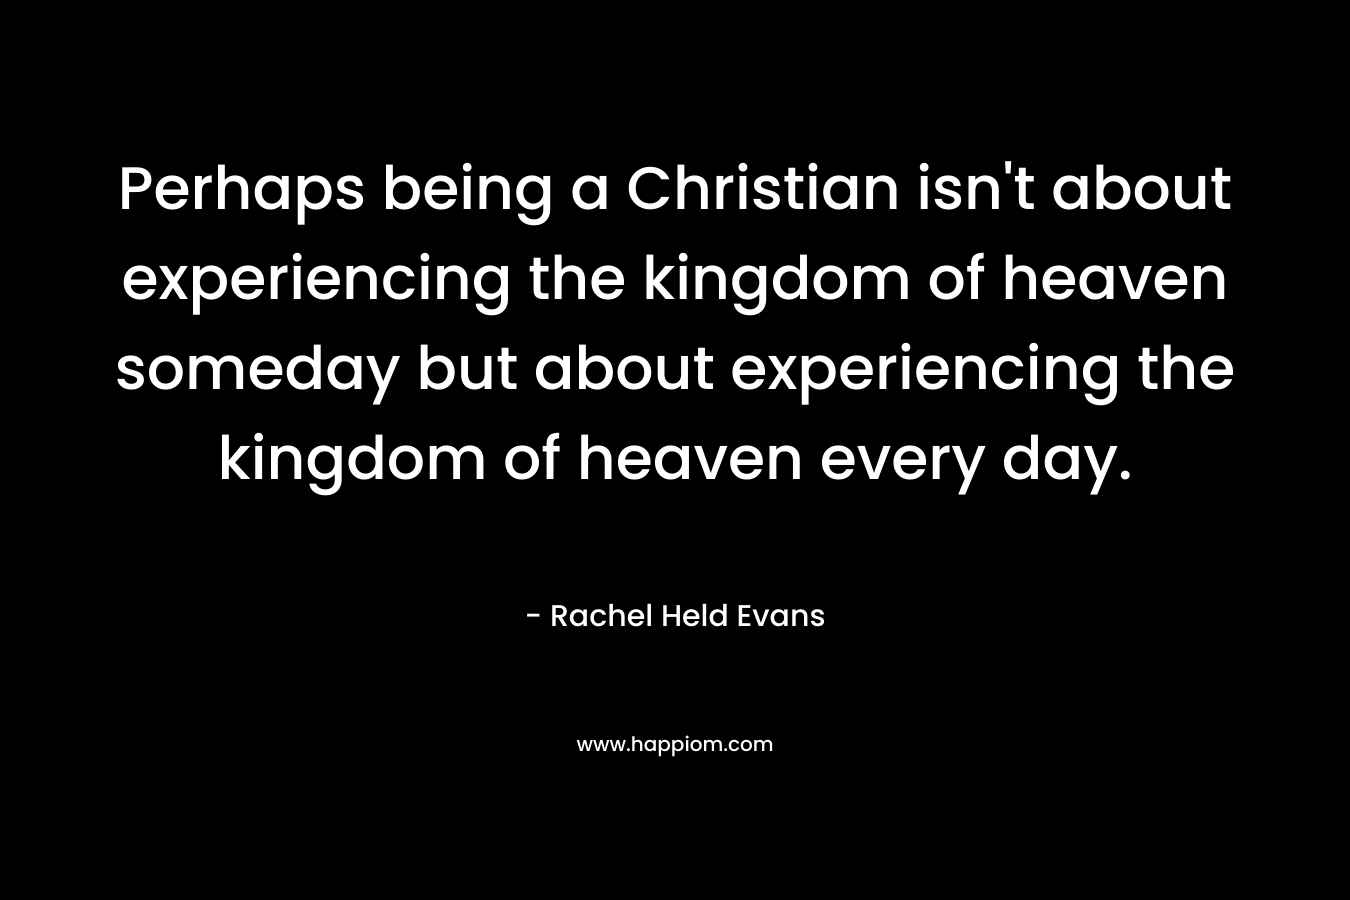 Perhaps being a Christian isn't about experiencing the kingdom of heaven someday but about experiencing the kingdom of heaven every day.